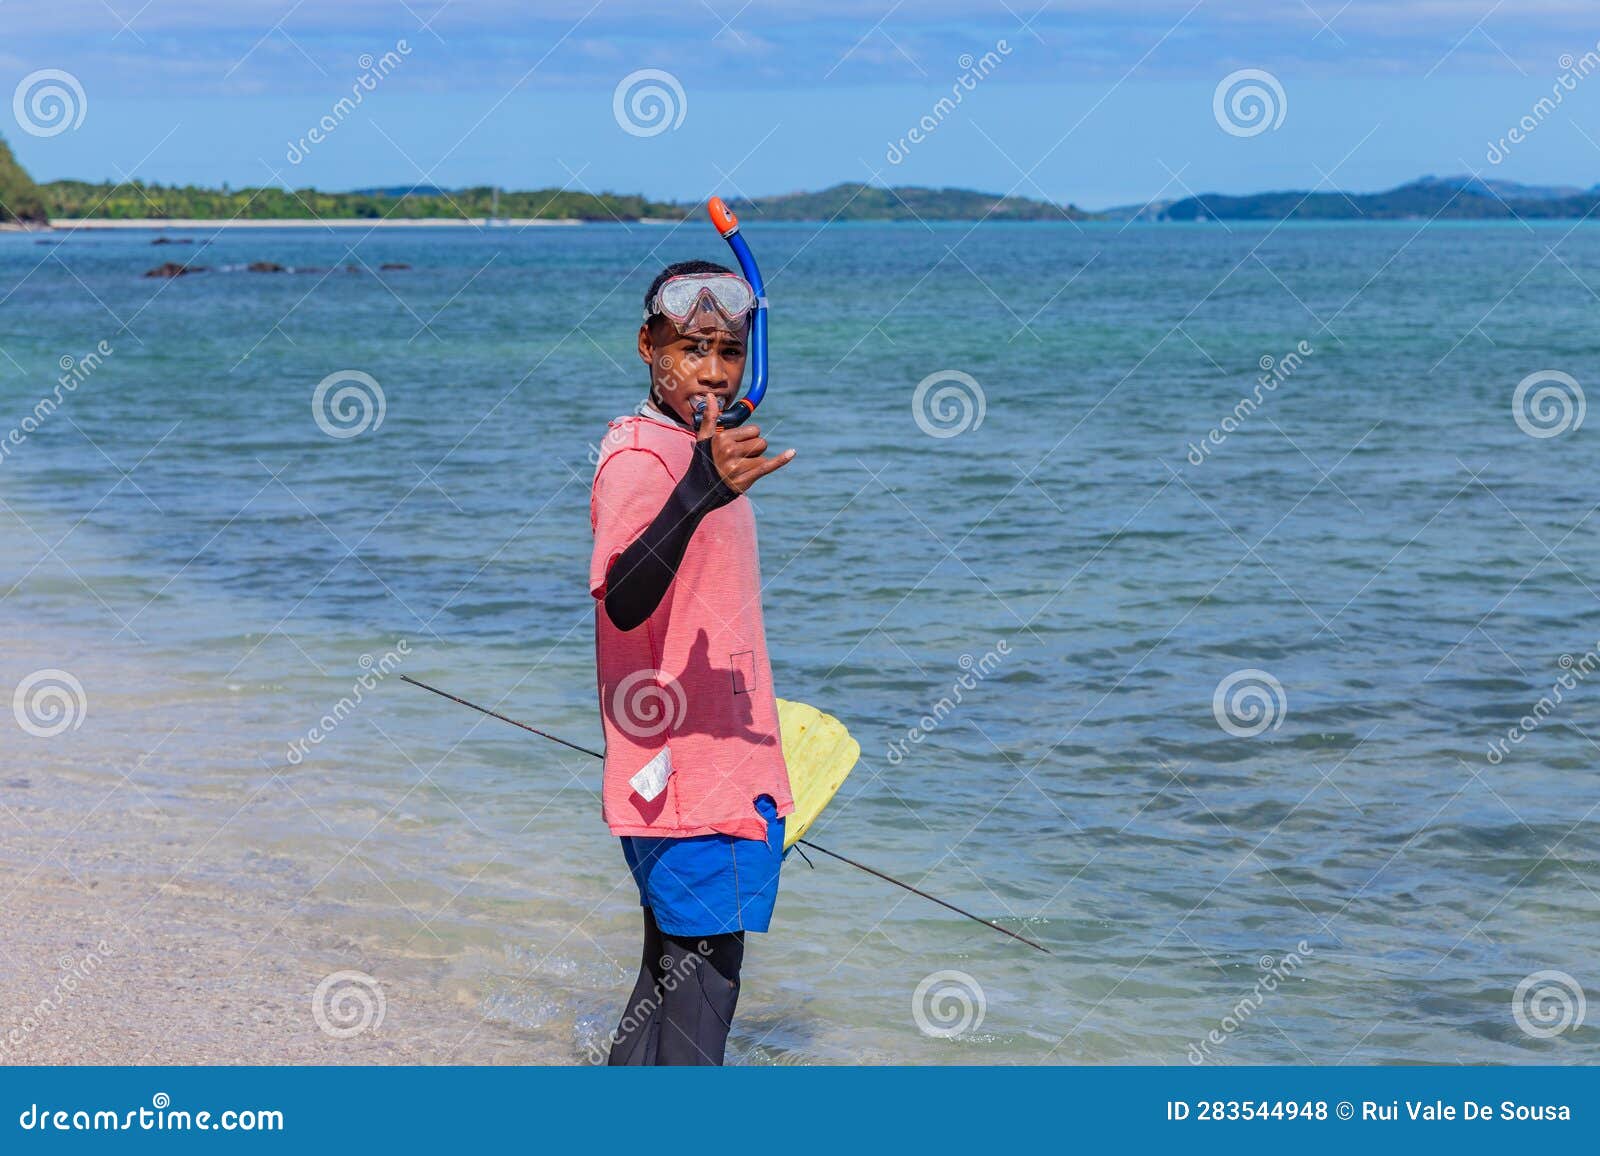 Kids fishing at the beach editorial stock photo. Image of black - 283544948